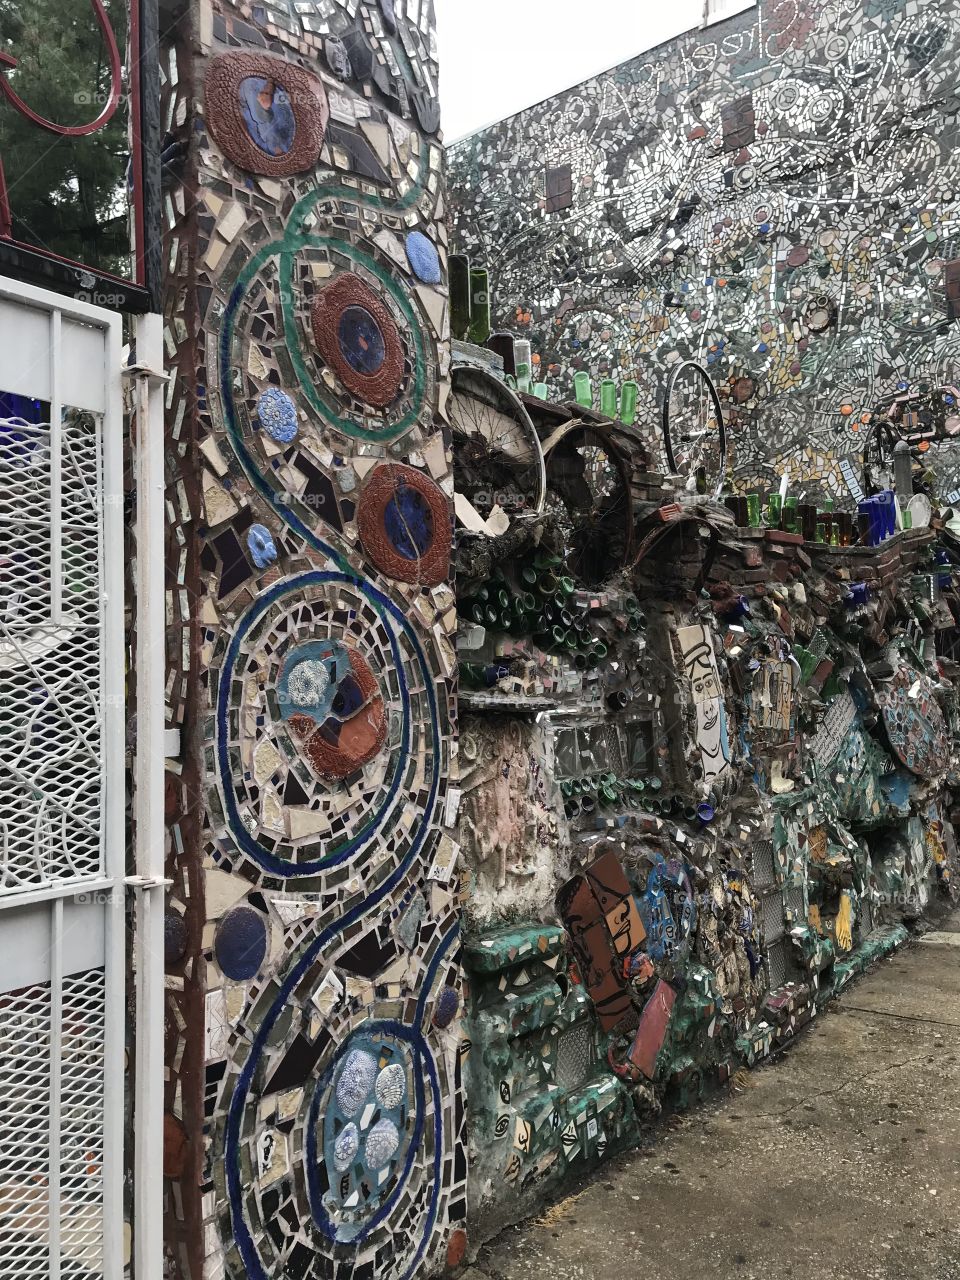 The Magic Gardens in Philly. 